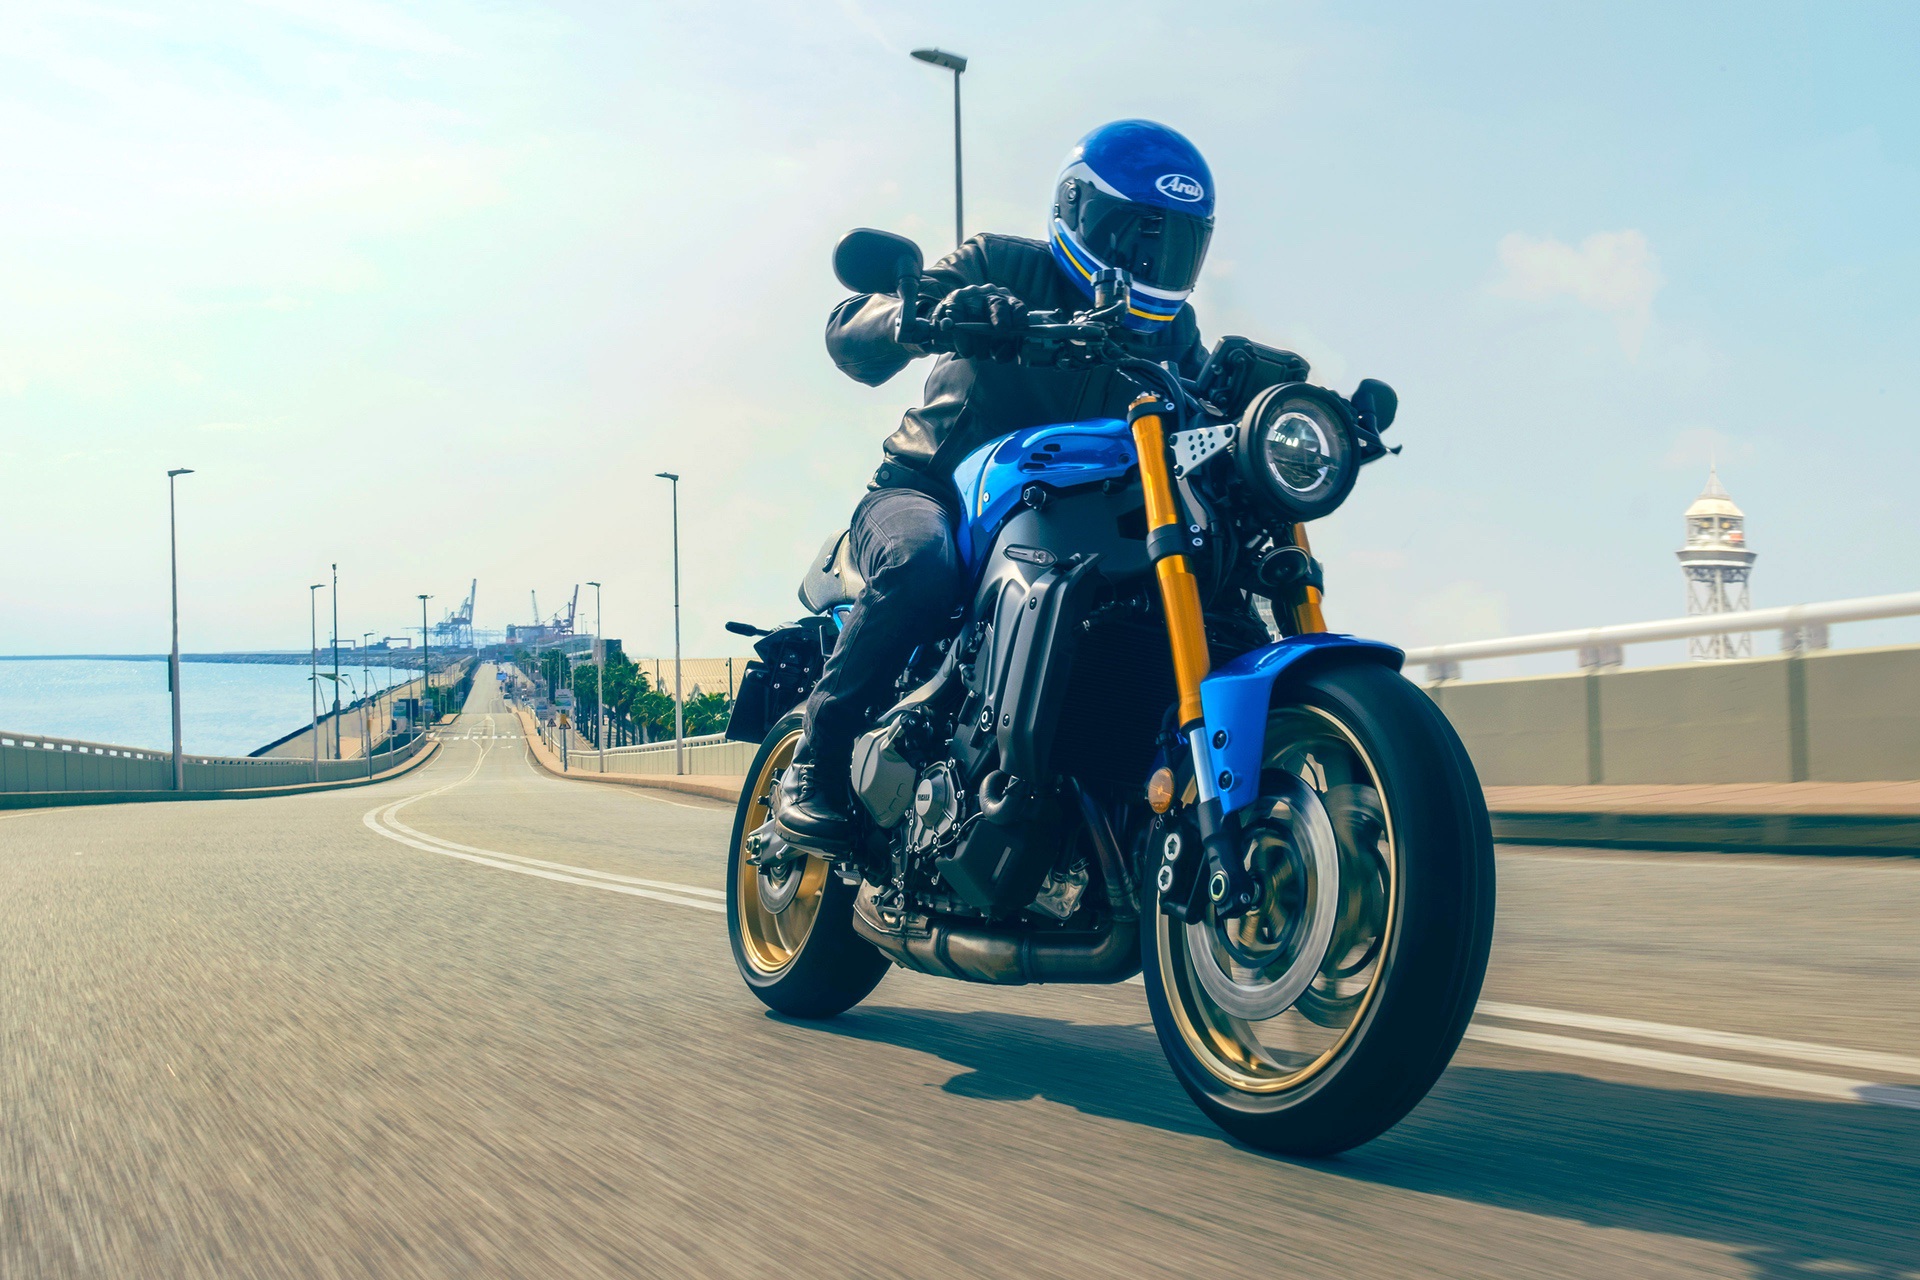 The 2022 Yamaha XSR900 motorcycle - front 3/4 profile as it rides under an overpass